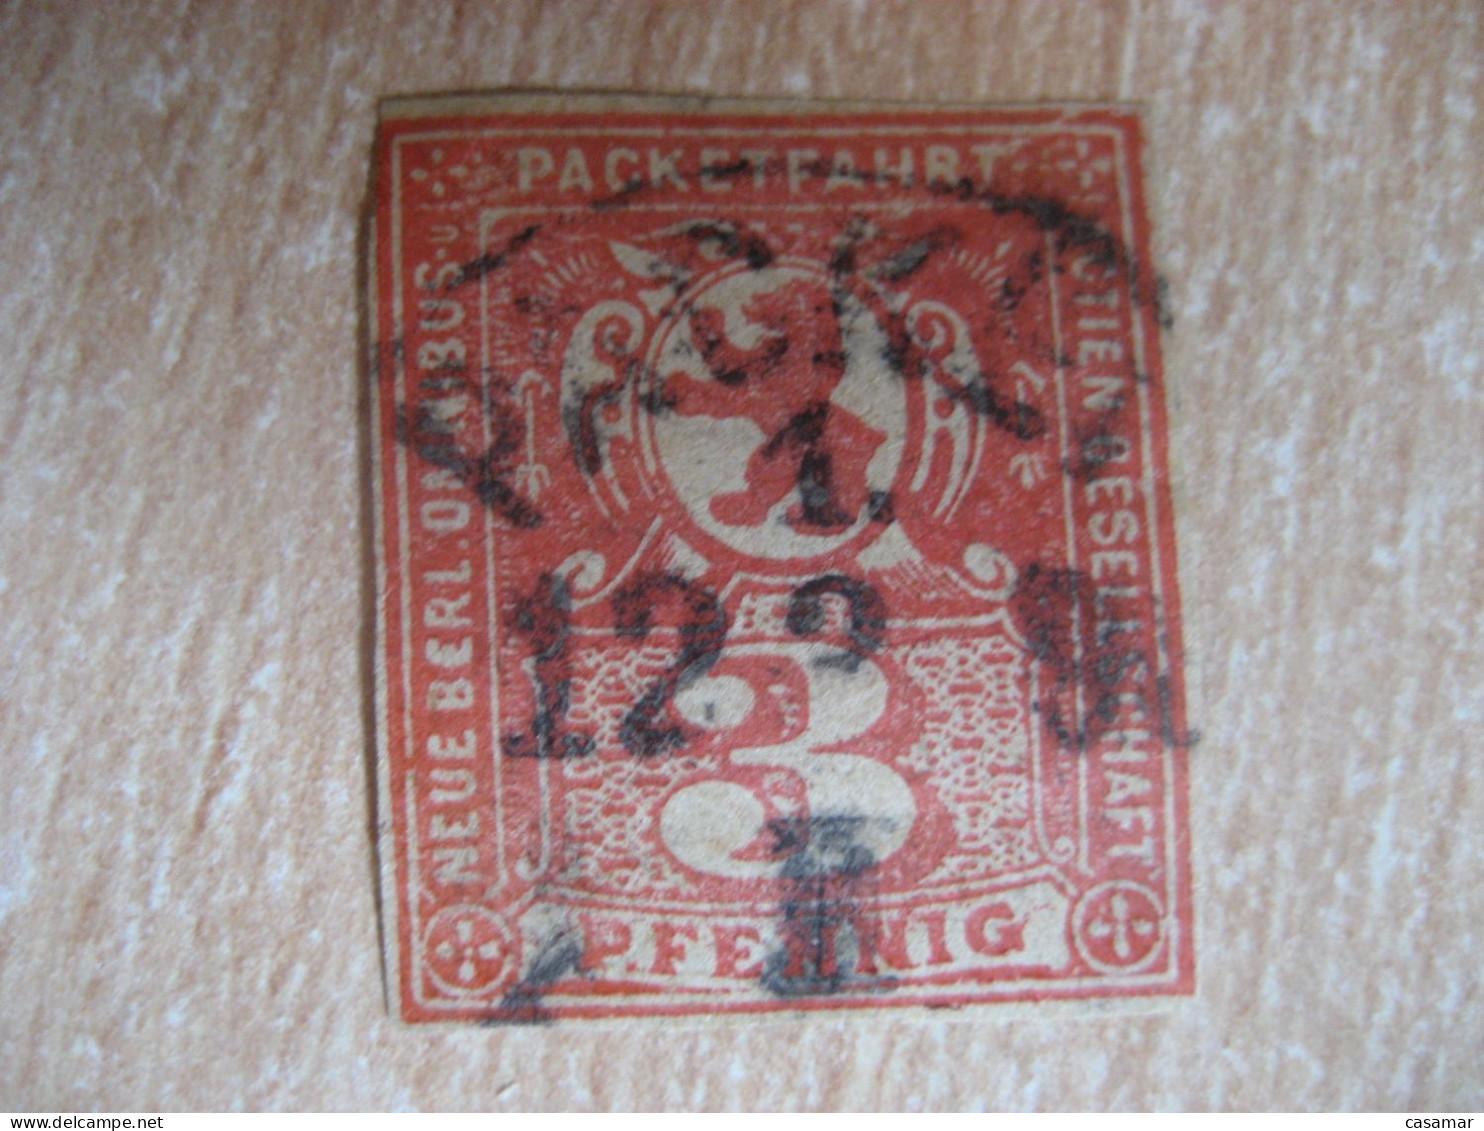 BERLIN Packetfahrt Neu Berl. Omnibus 3 Pf Red Imperforated Michel ??? Privat Private Local Stamp GERMANY Slight Faults - Private & Local Mails